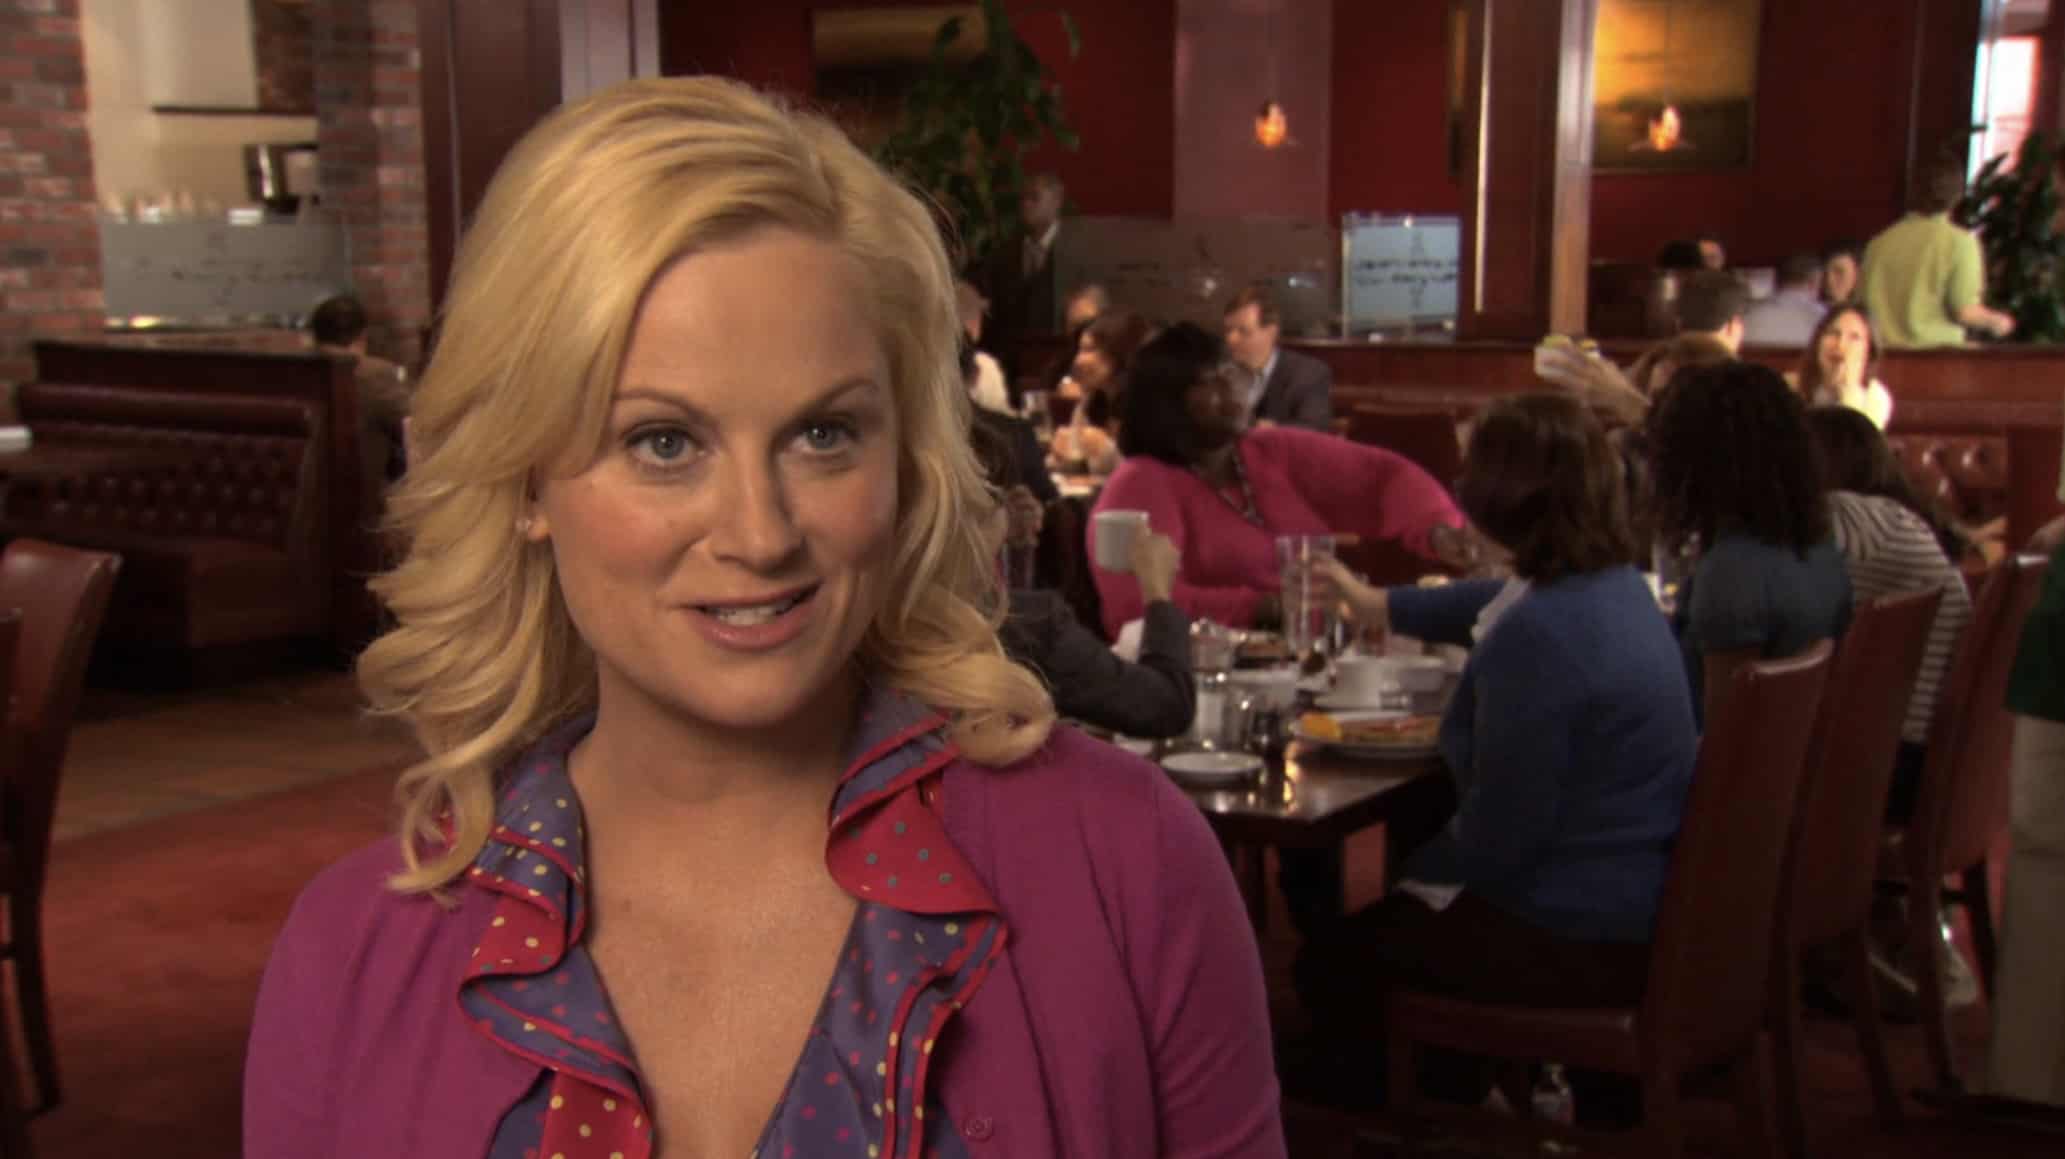 A blonde woman talks to the camera while in a restaurant in this image from Peacock